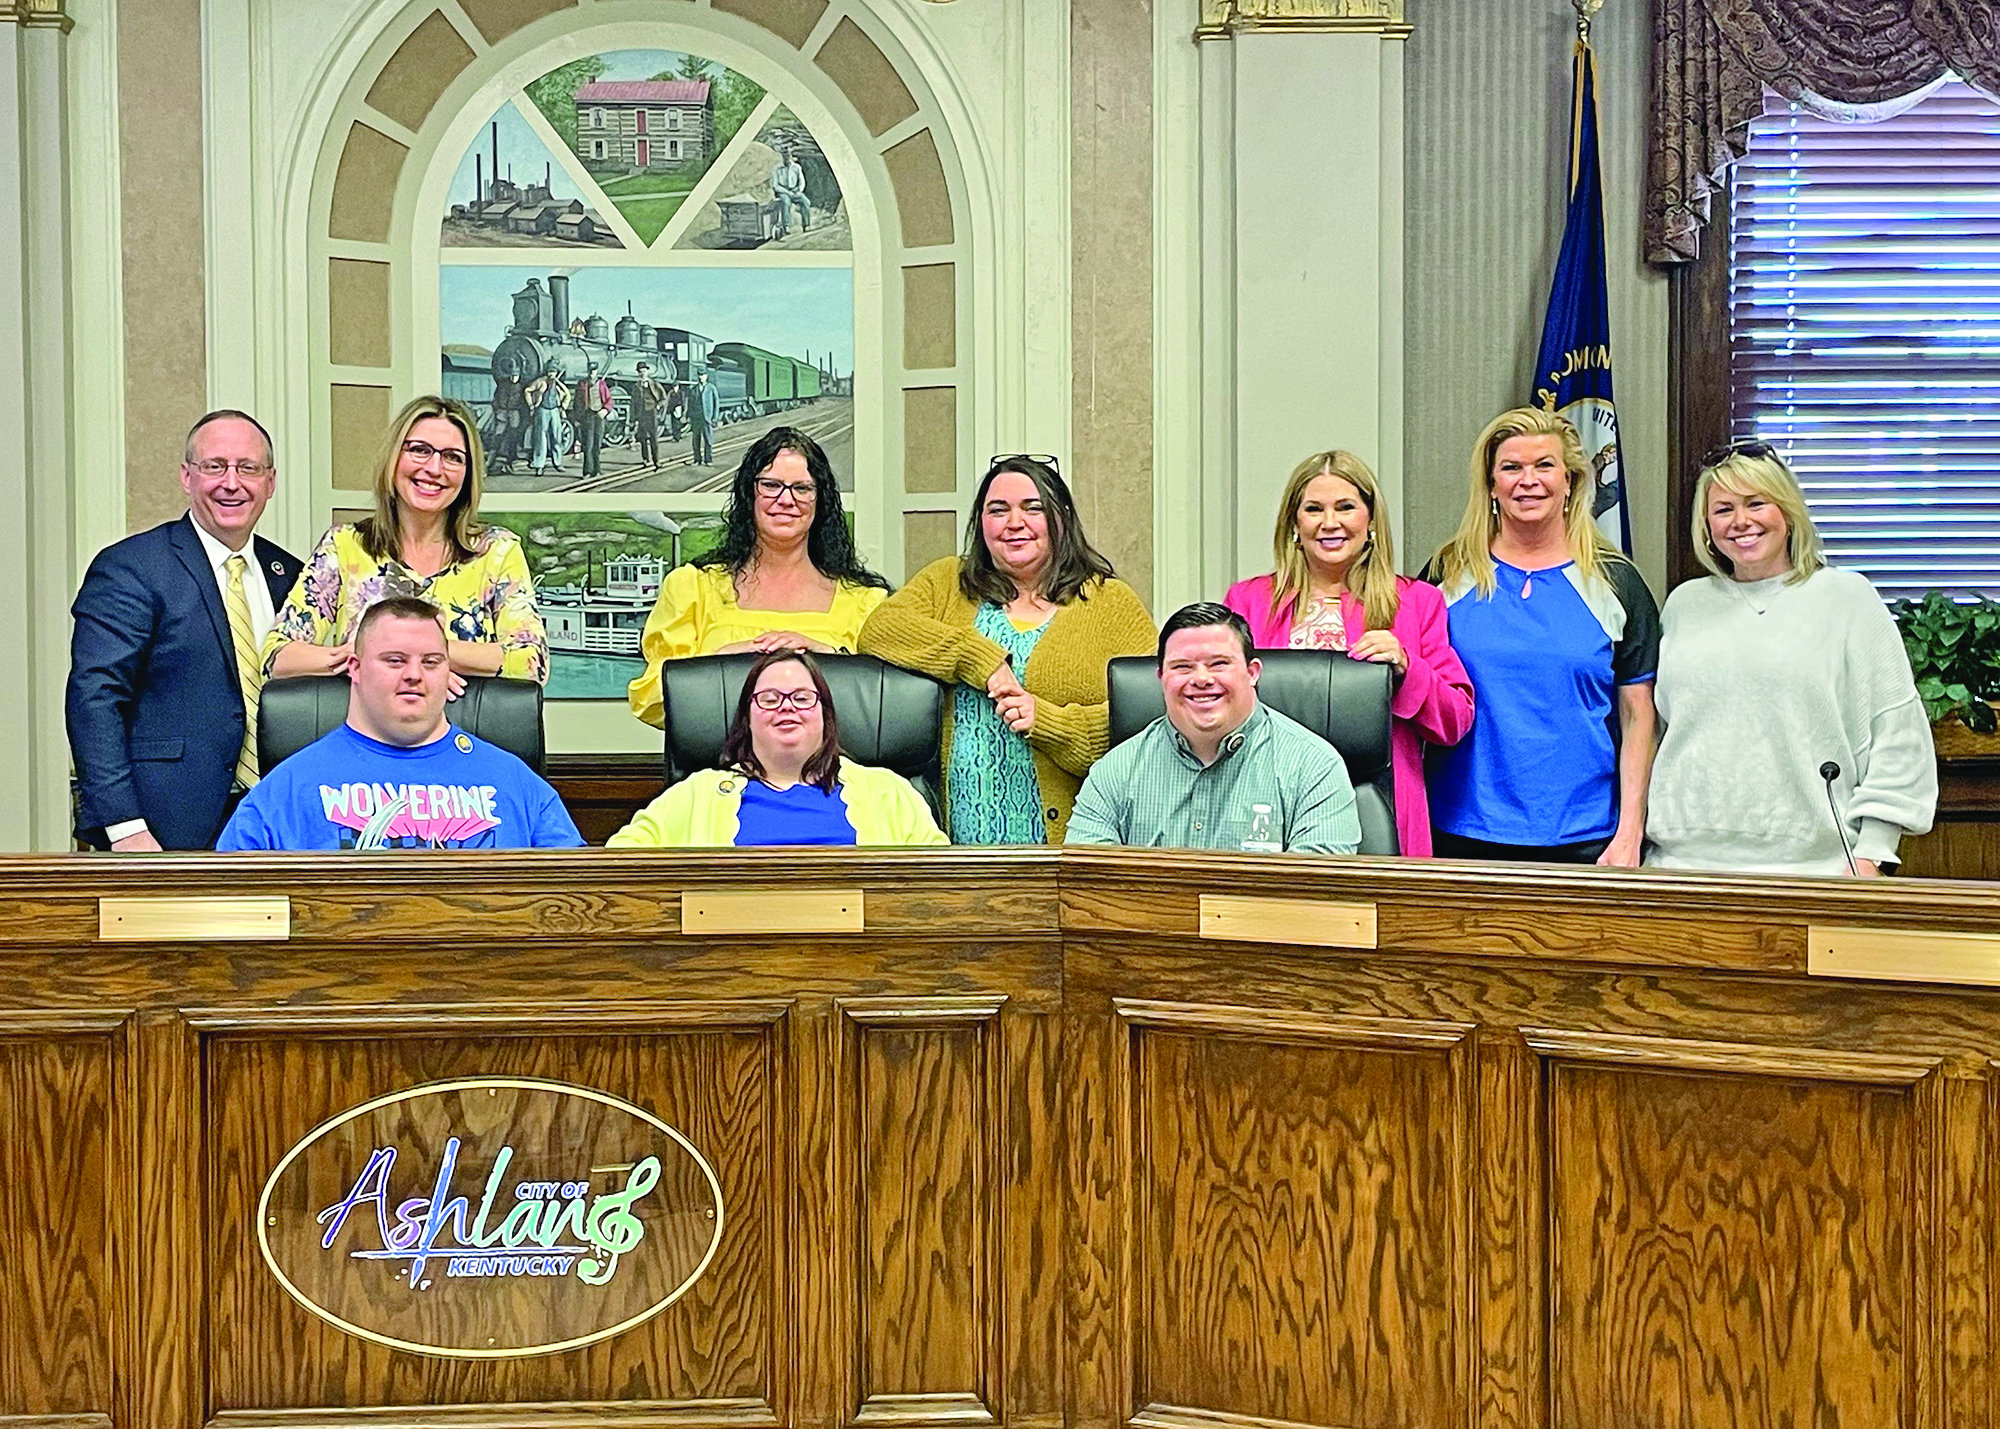 Inclusion in Action  Mayor of Ashland Honors Young Adults with Down Syndrome by Appointing Them as Ambassadors to the City